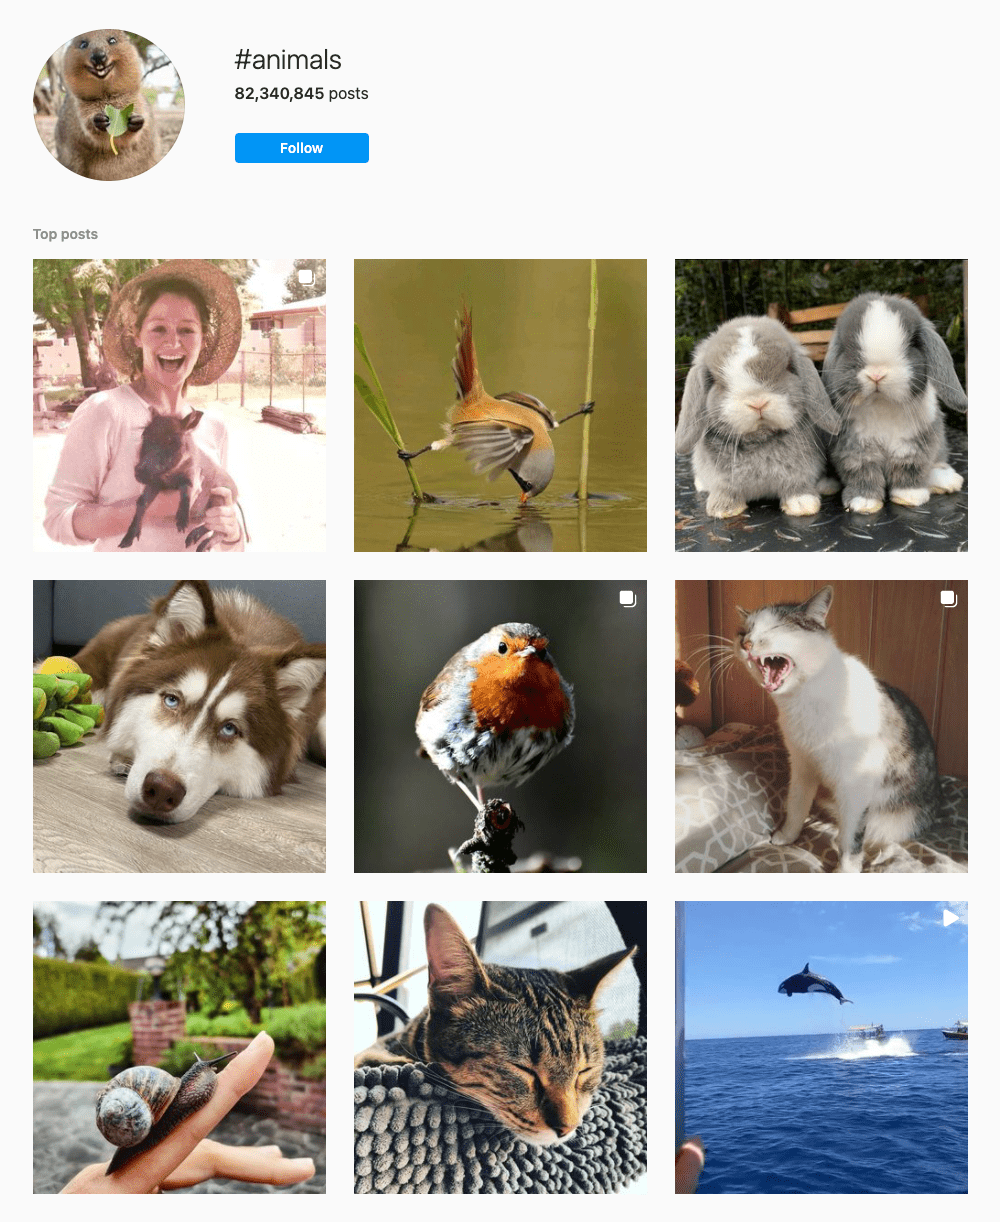 #animals Hashtags for Instagram